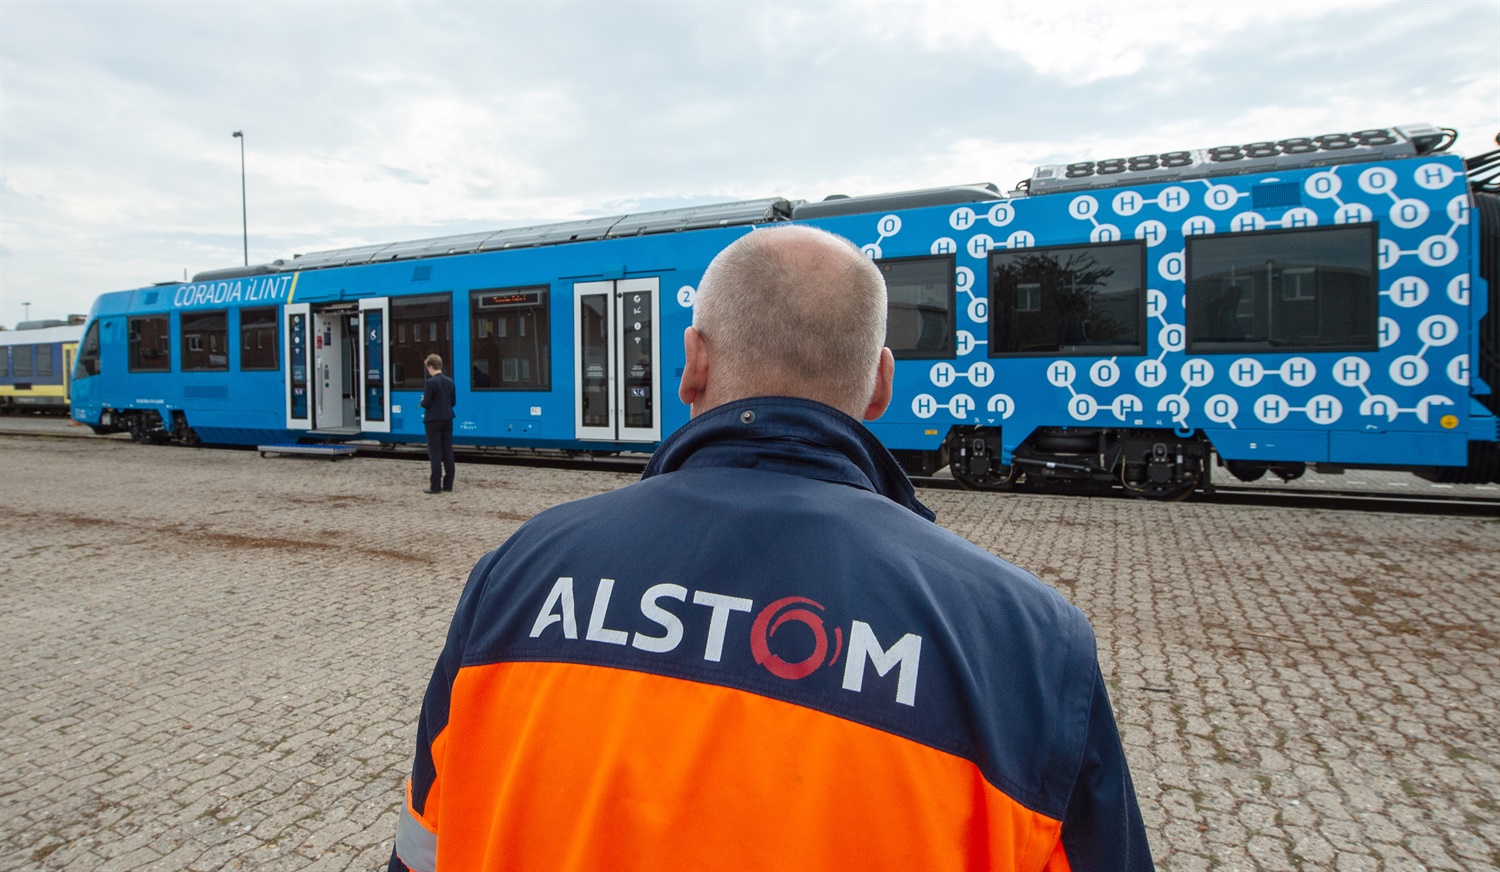 Siemens and Alstom prepared to walk away from merger if EU Commission rejects concessions